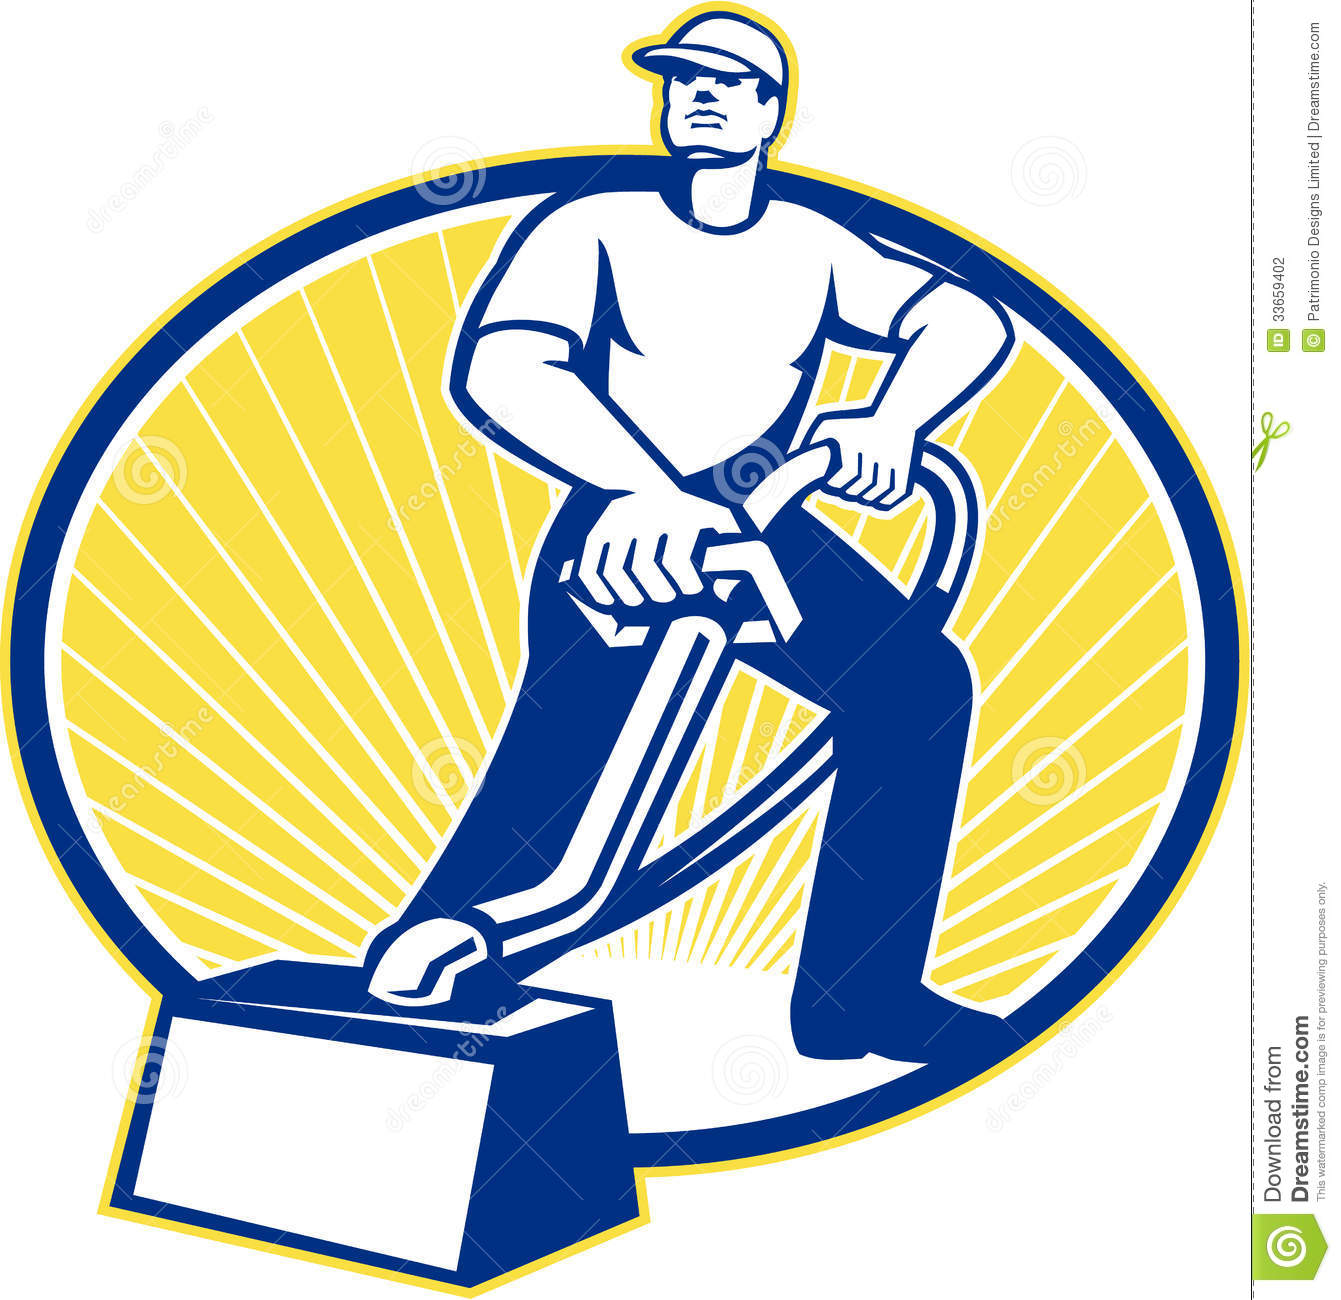 Illustration Of A Carpet Cleaner Worker Vacuuming With Vacuum Cleaner